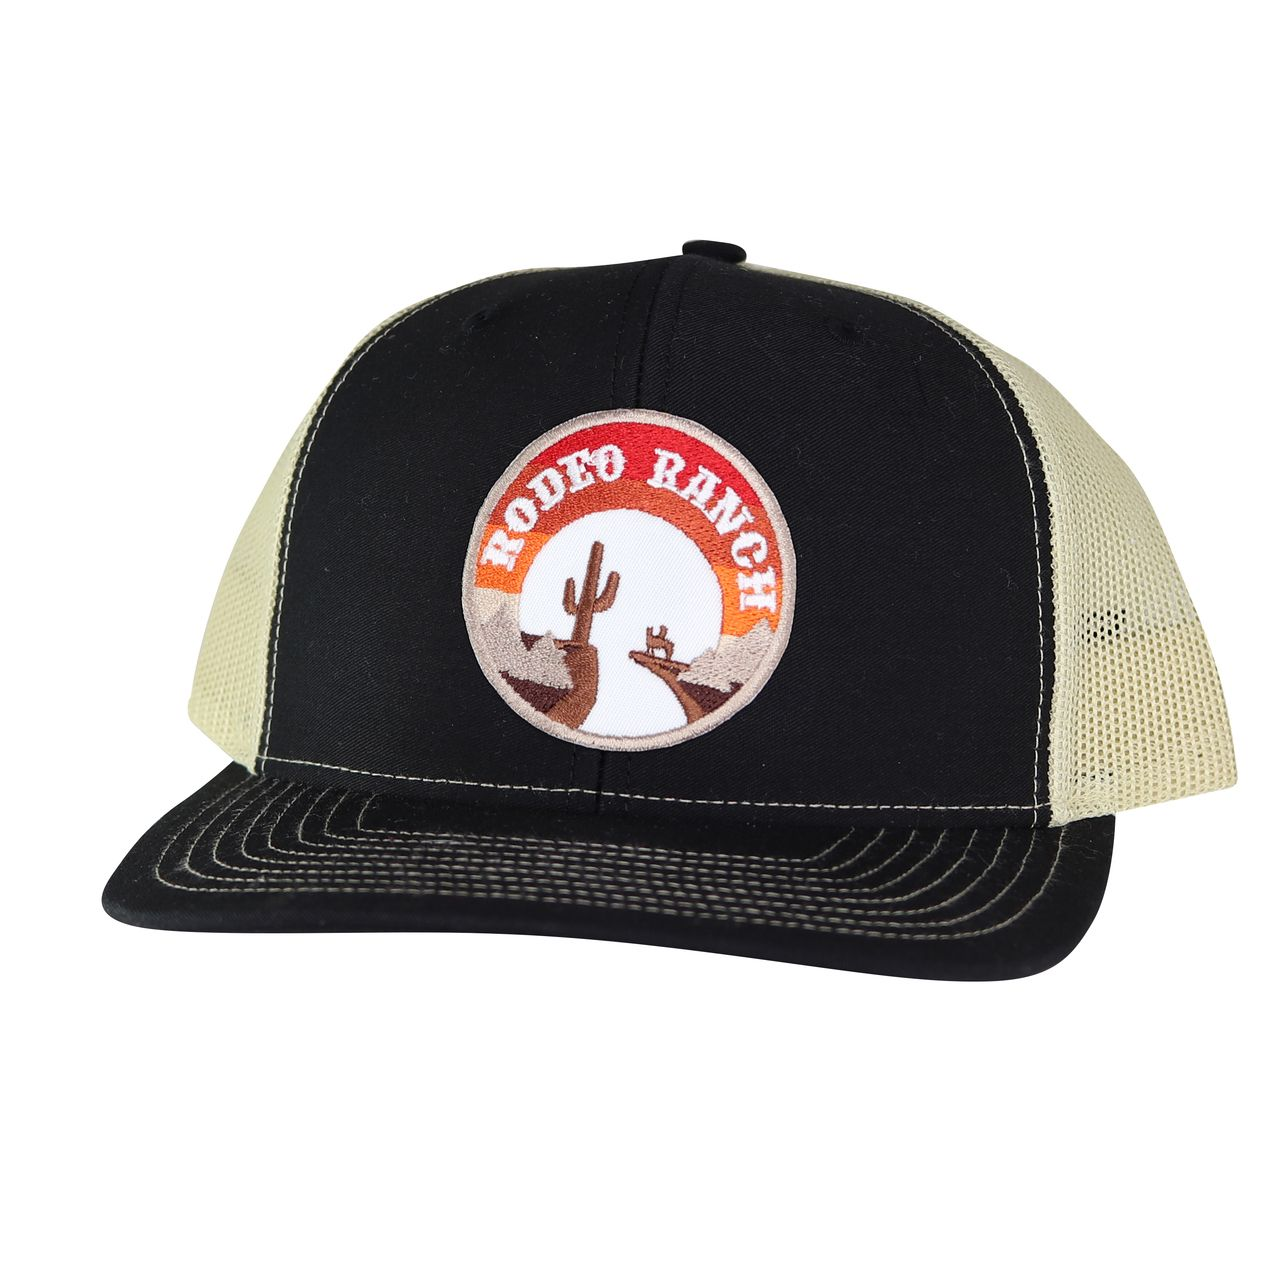 Rodeo Ranch Out West Hat - Black and Khaki